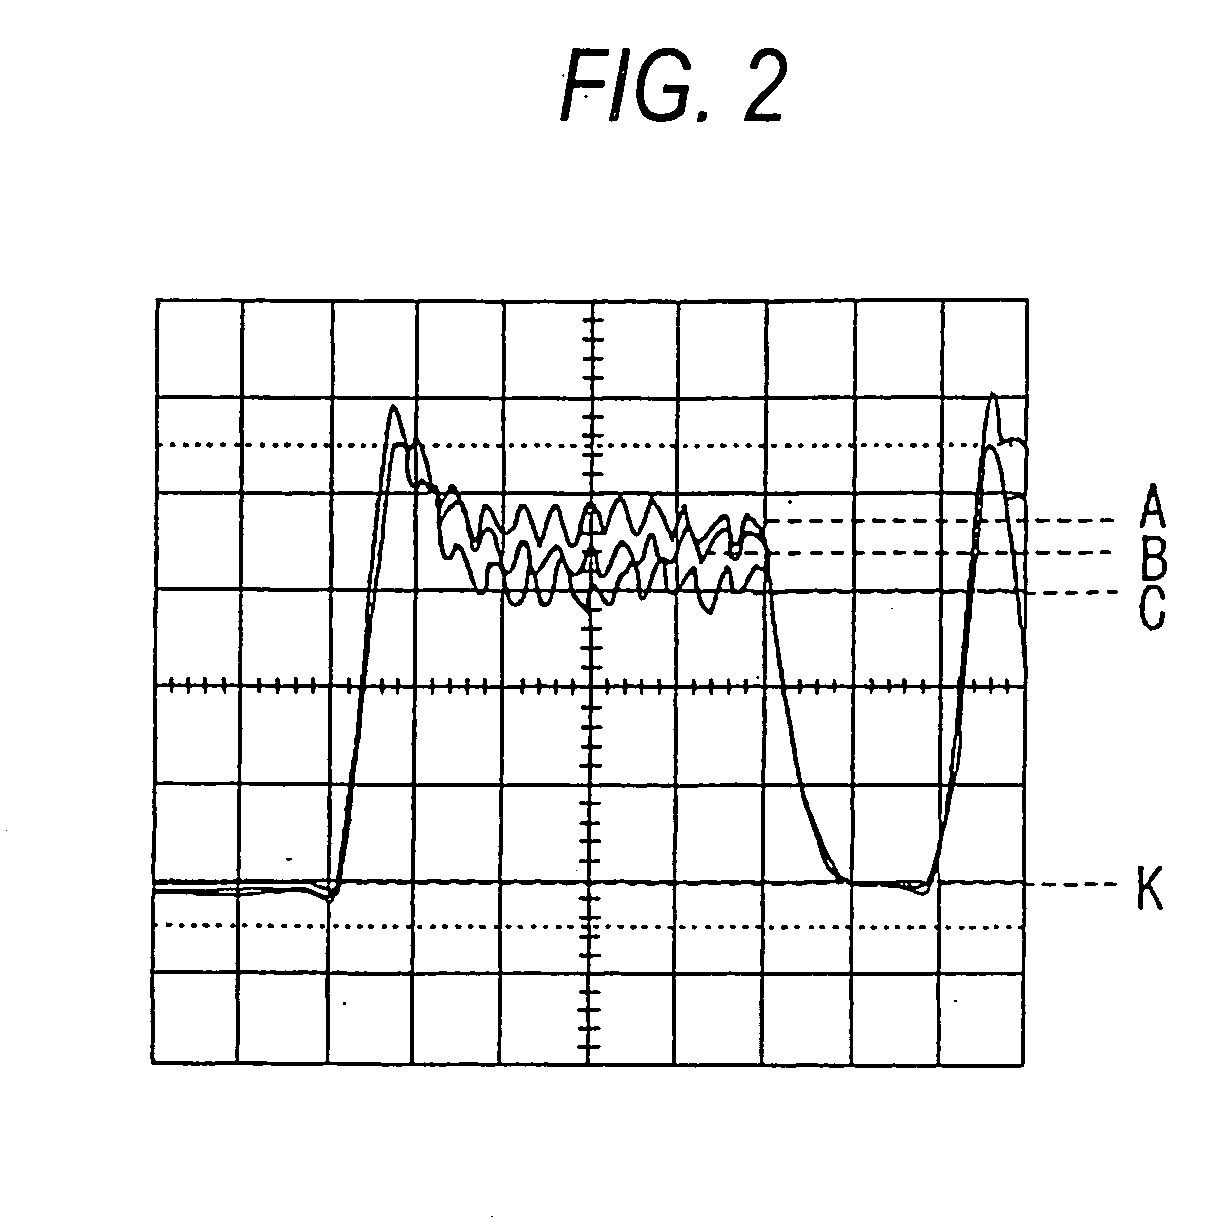 Optical disk apparatus and method of recording with optical disk apparatus